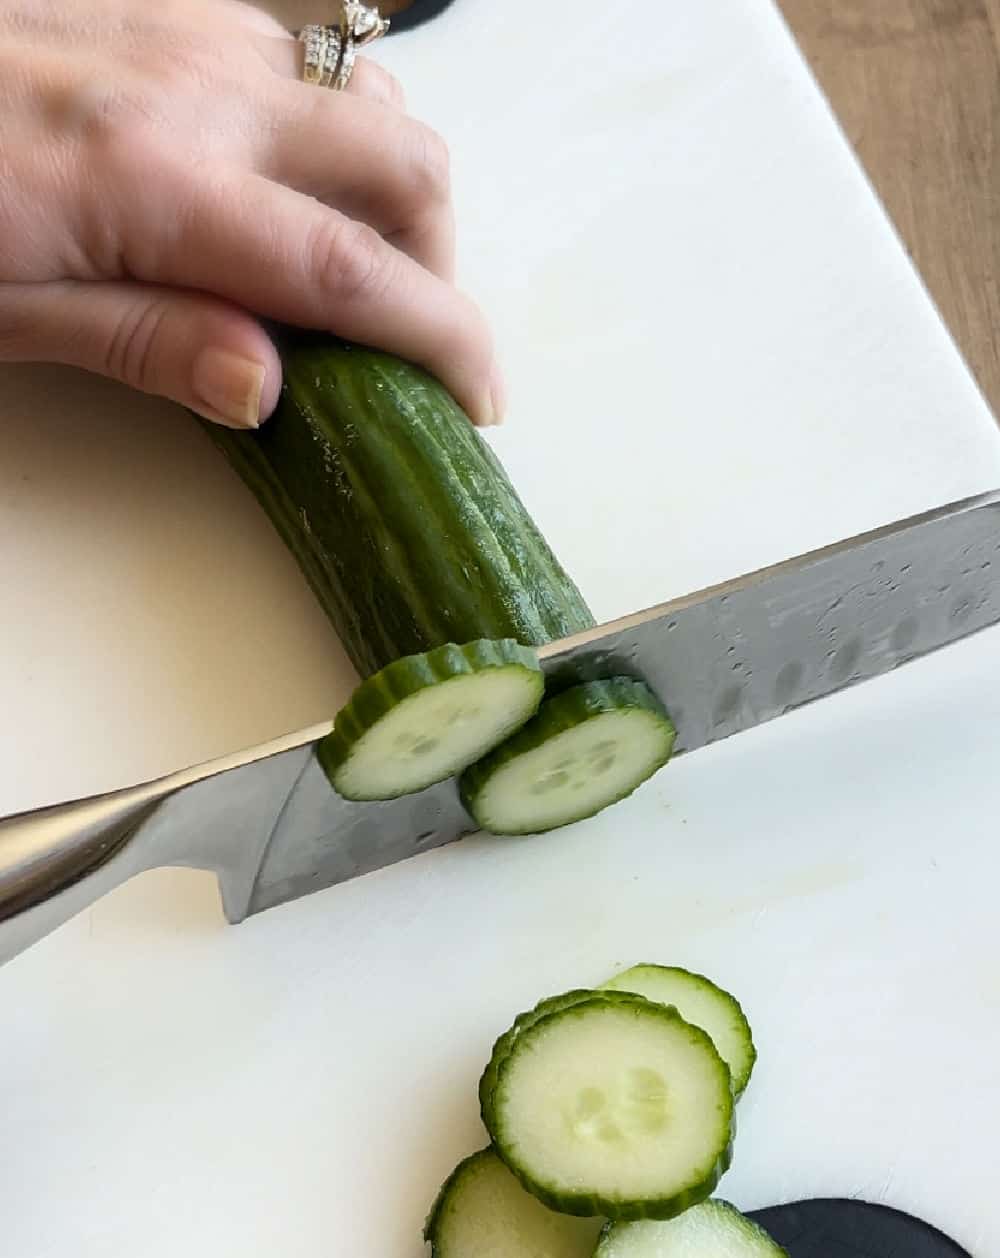 slice cucumber in thin slices.